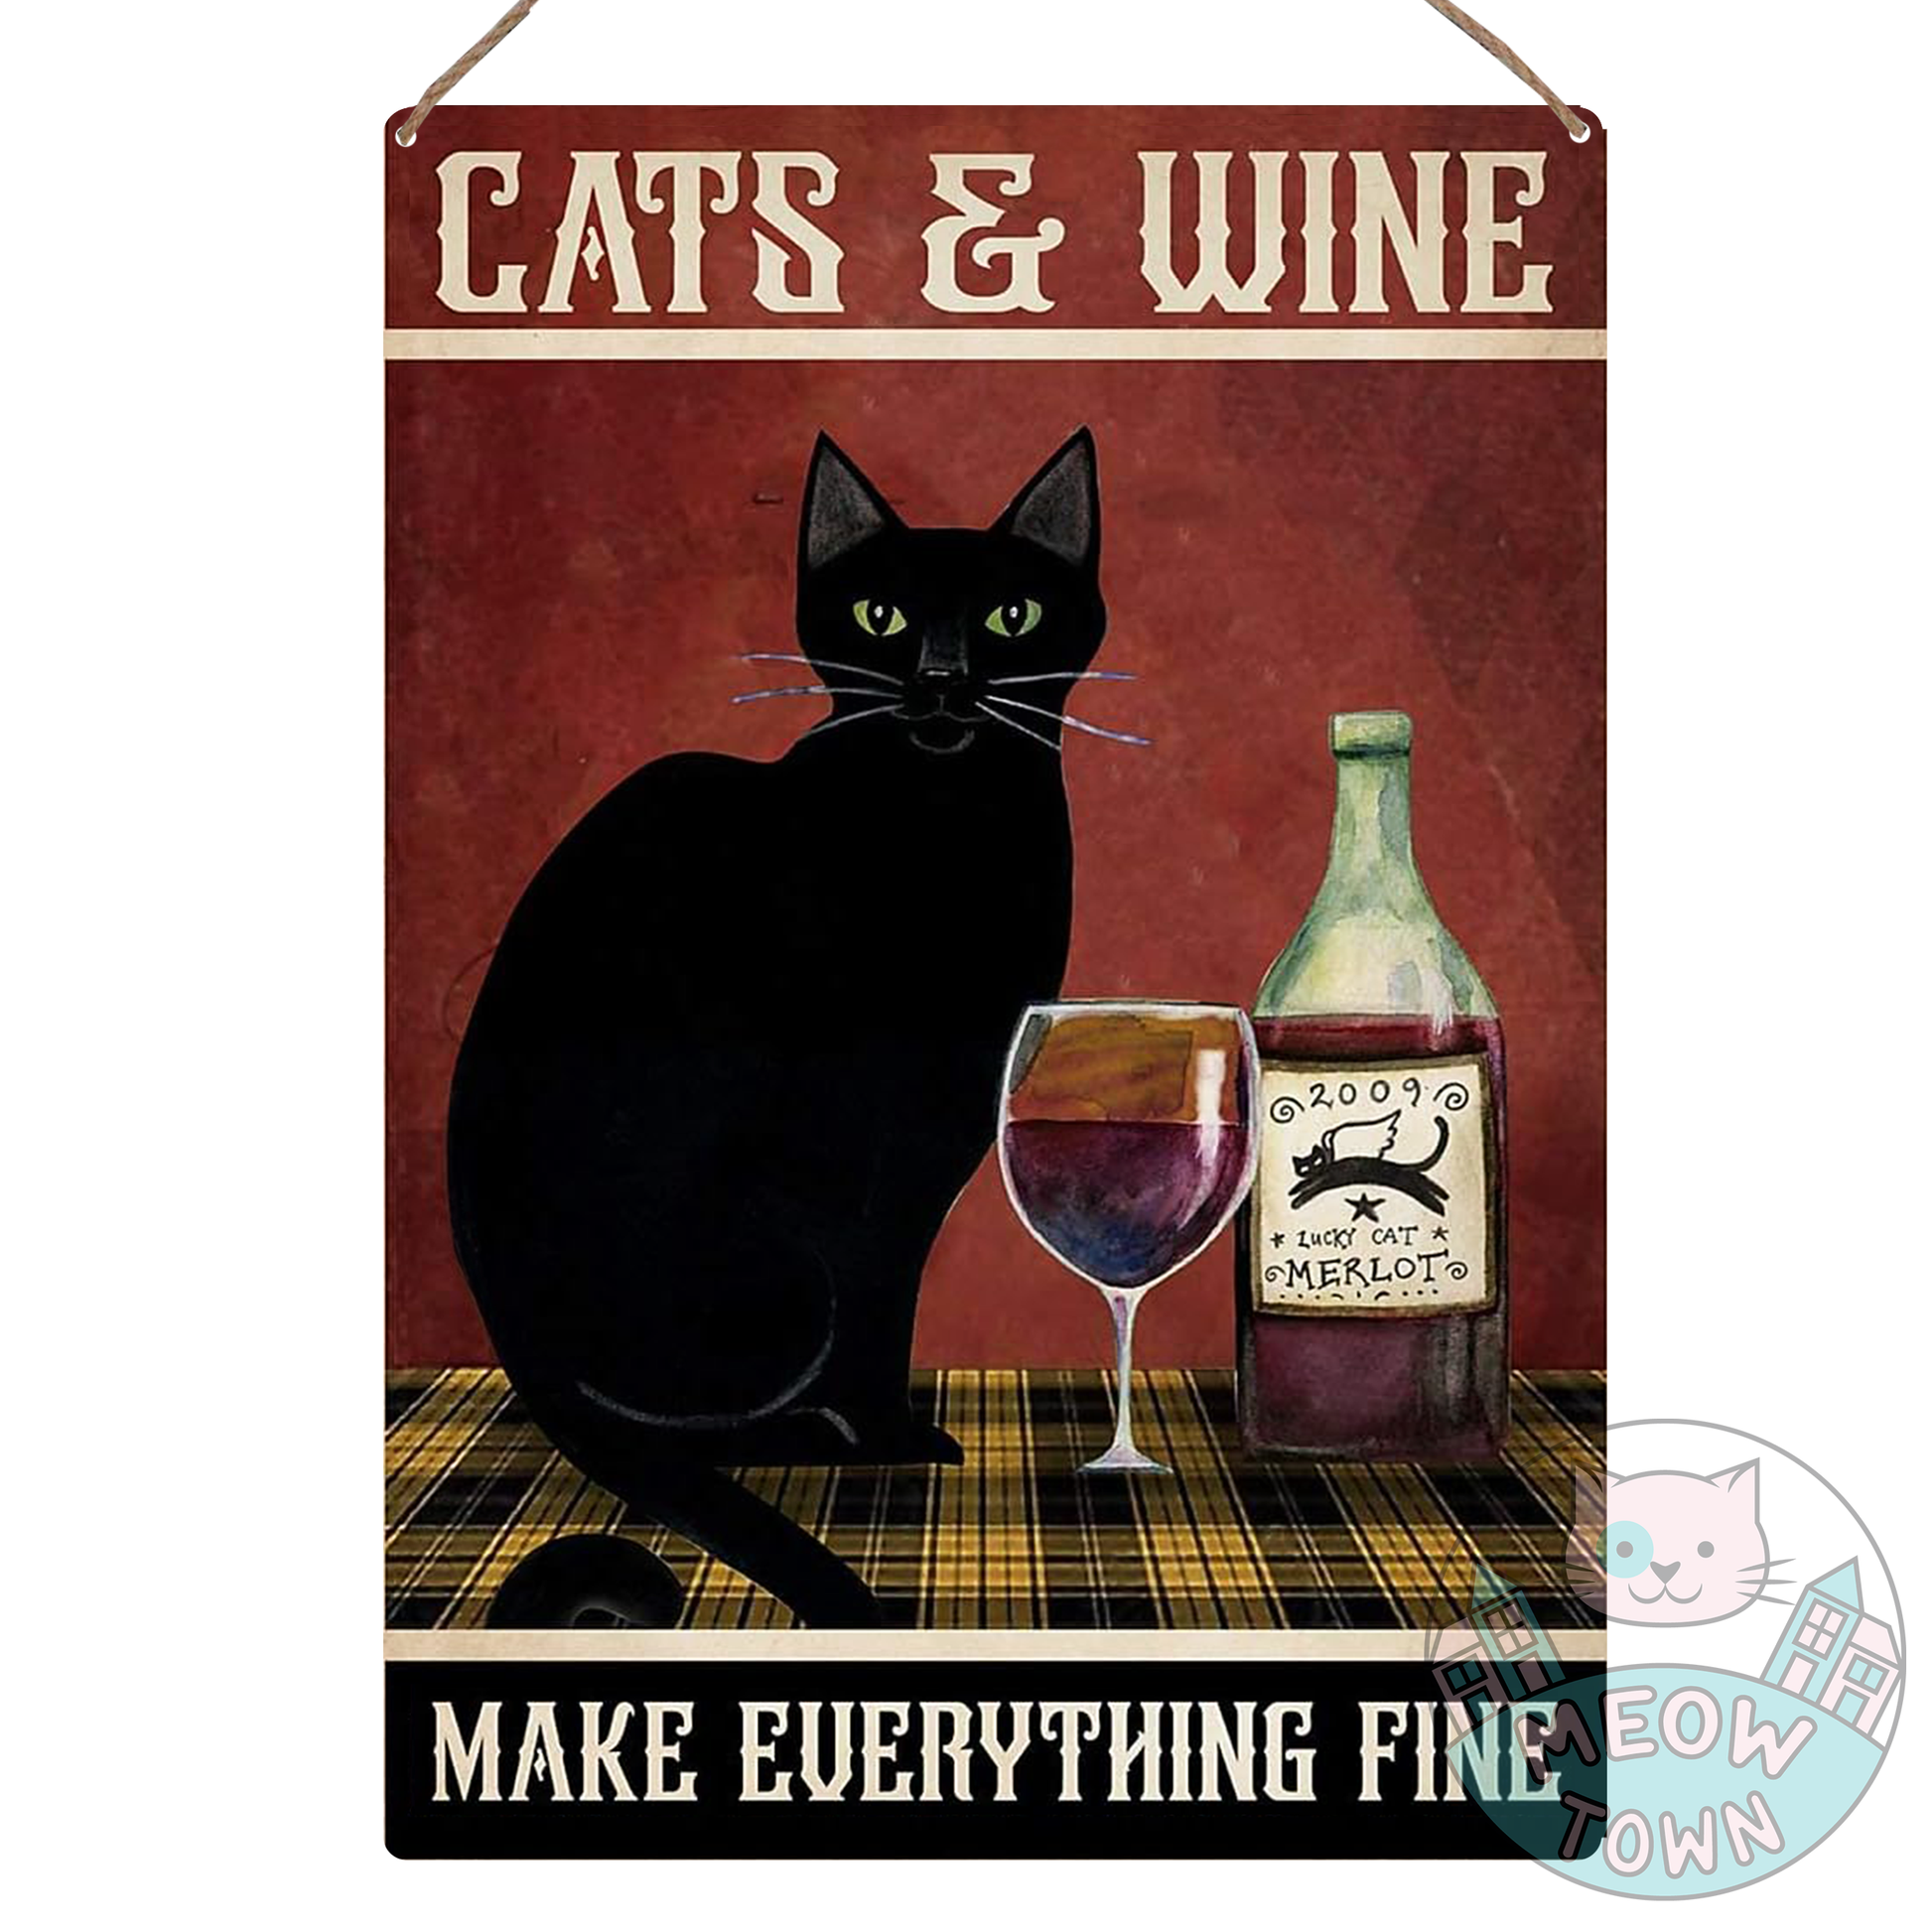 A lovely metal wall sign with a black kitty and ‘ Cats and wine make everything fine’ slogan to brighten your home with :)